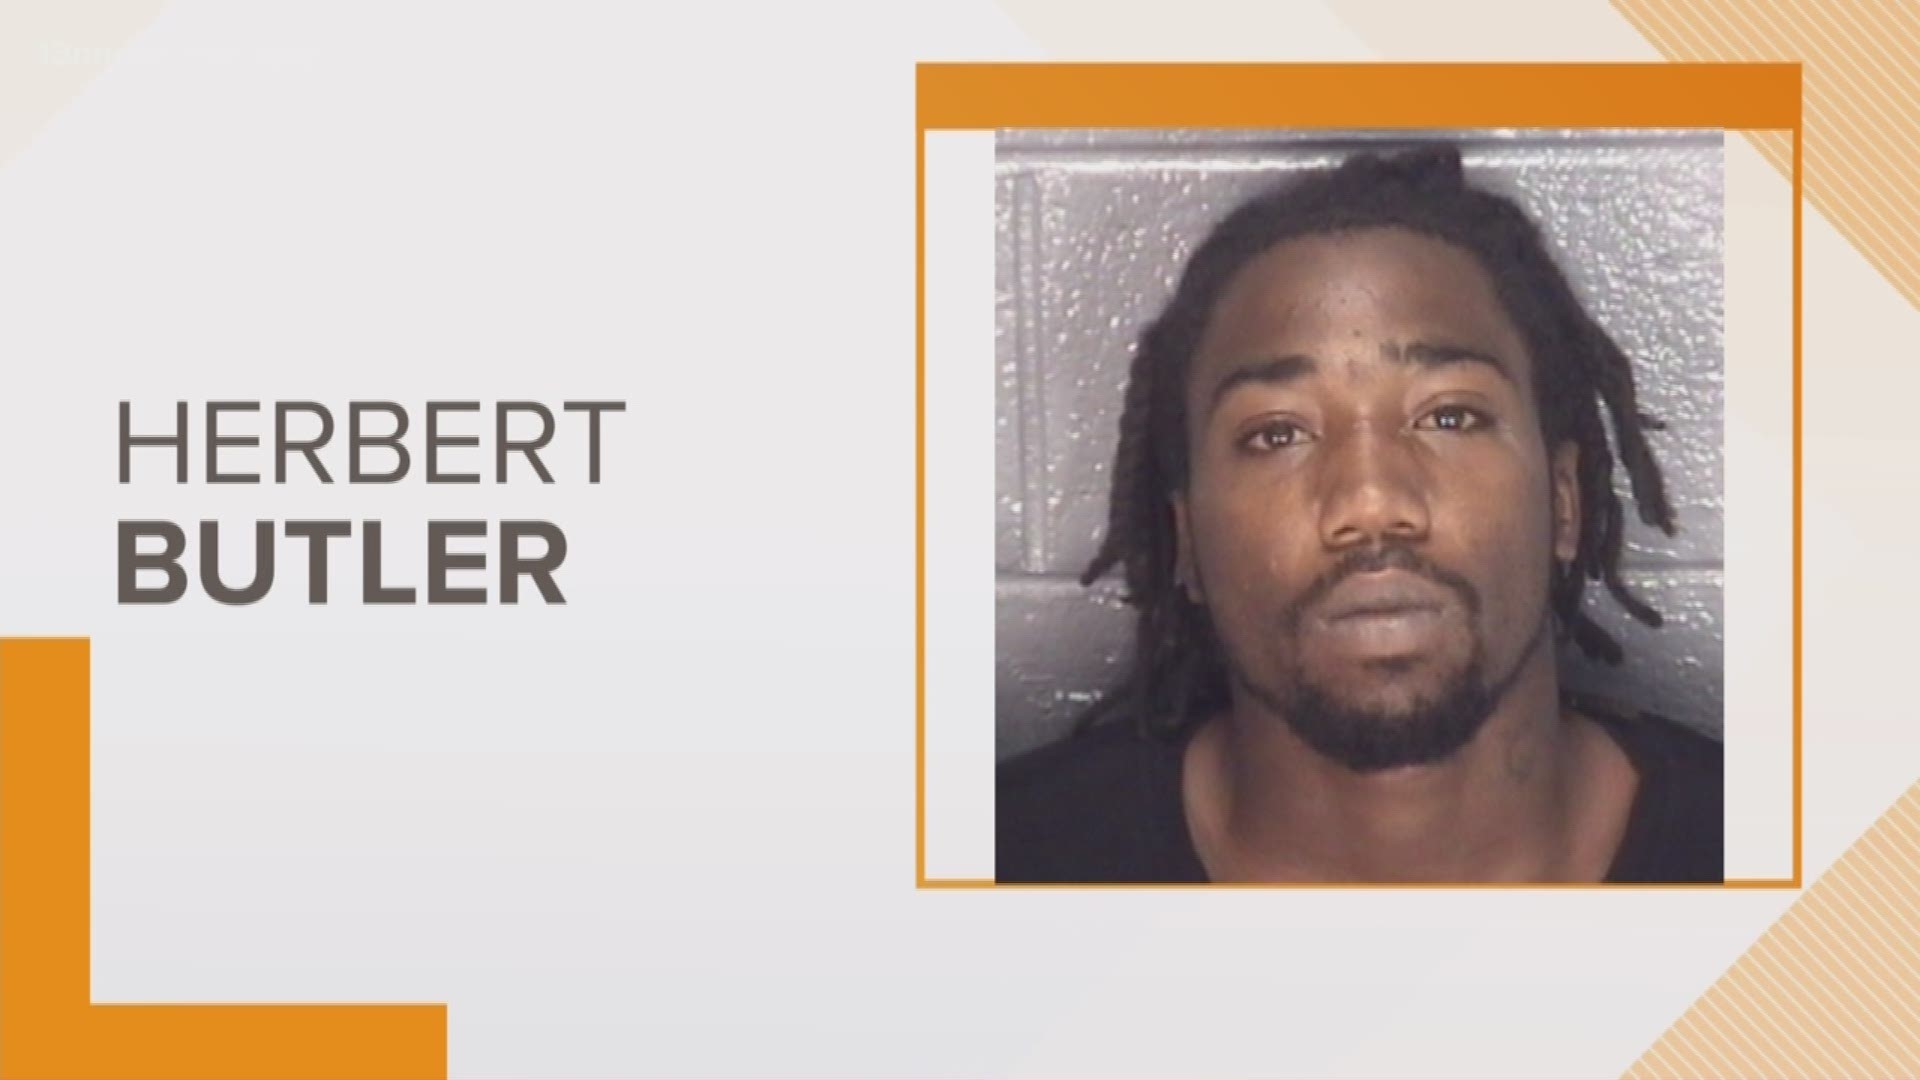 The Hampton Police Division is looking for a Herbert Butler wanted in connection to a shooting on North Armistead Avenue. Police said the man he shot is expected to be okay.